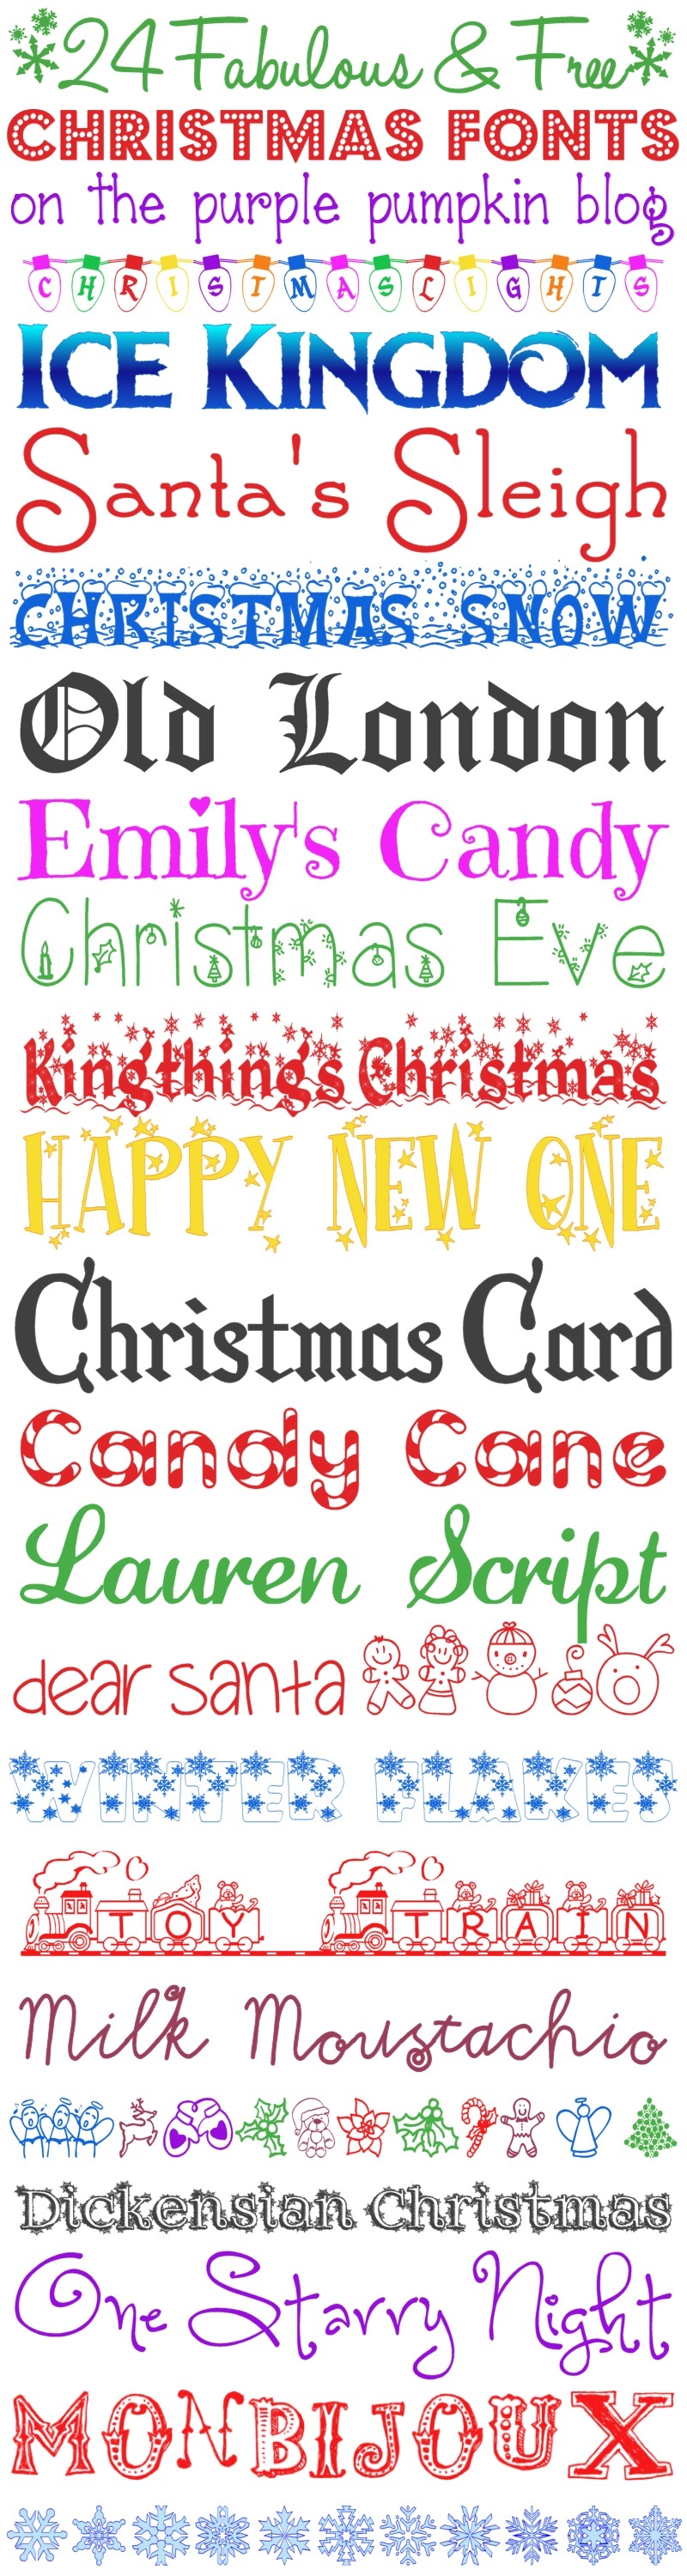 24 Fabulous and Free Christmas Fonts